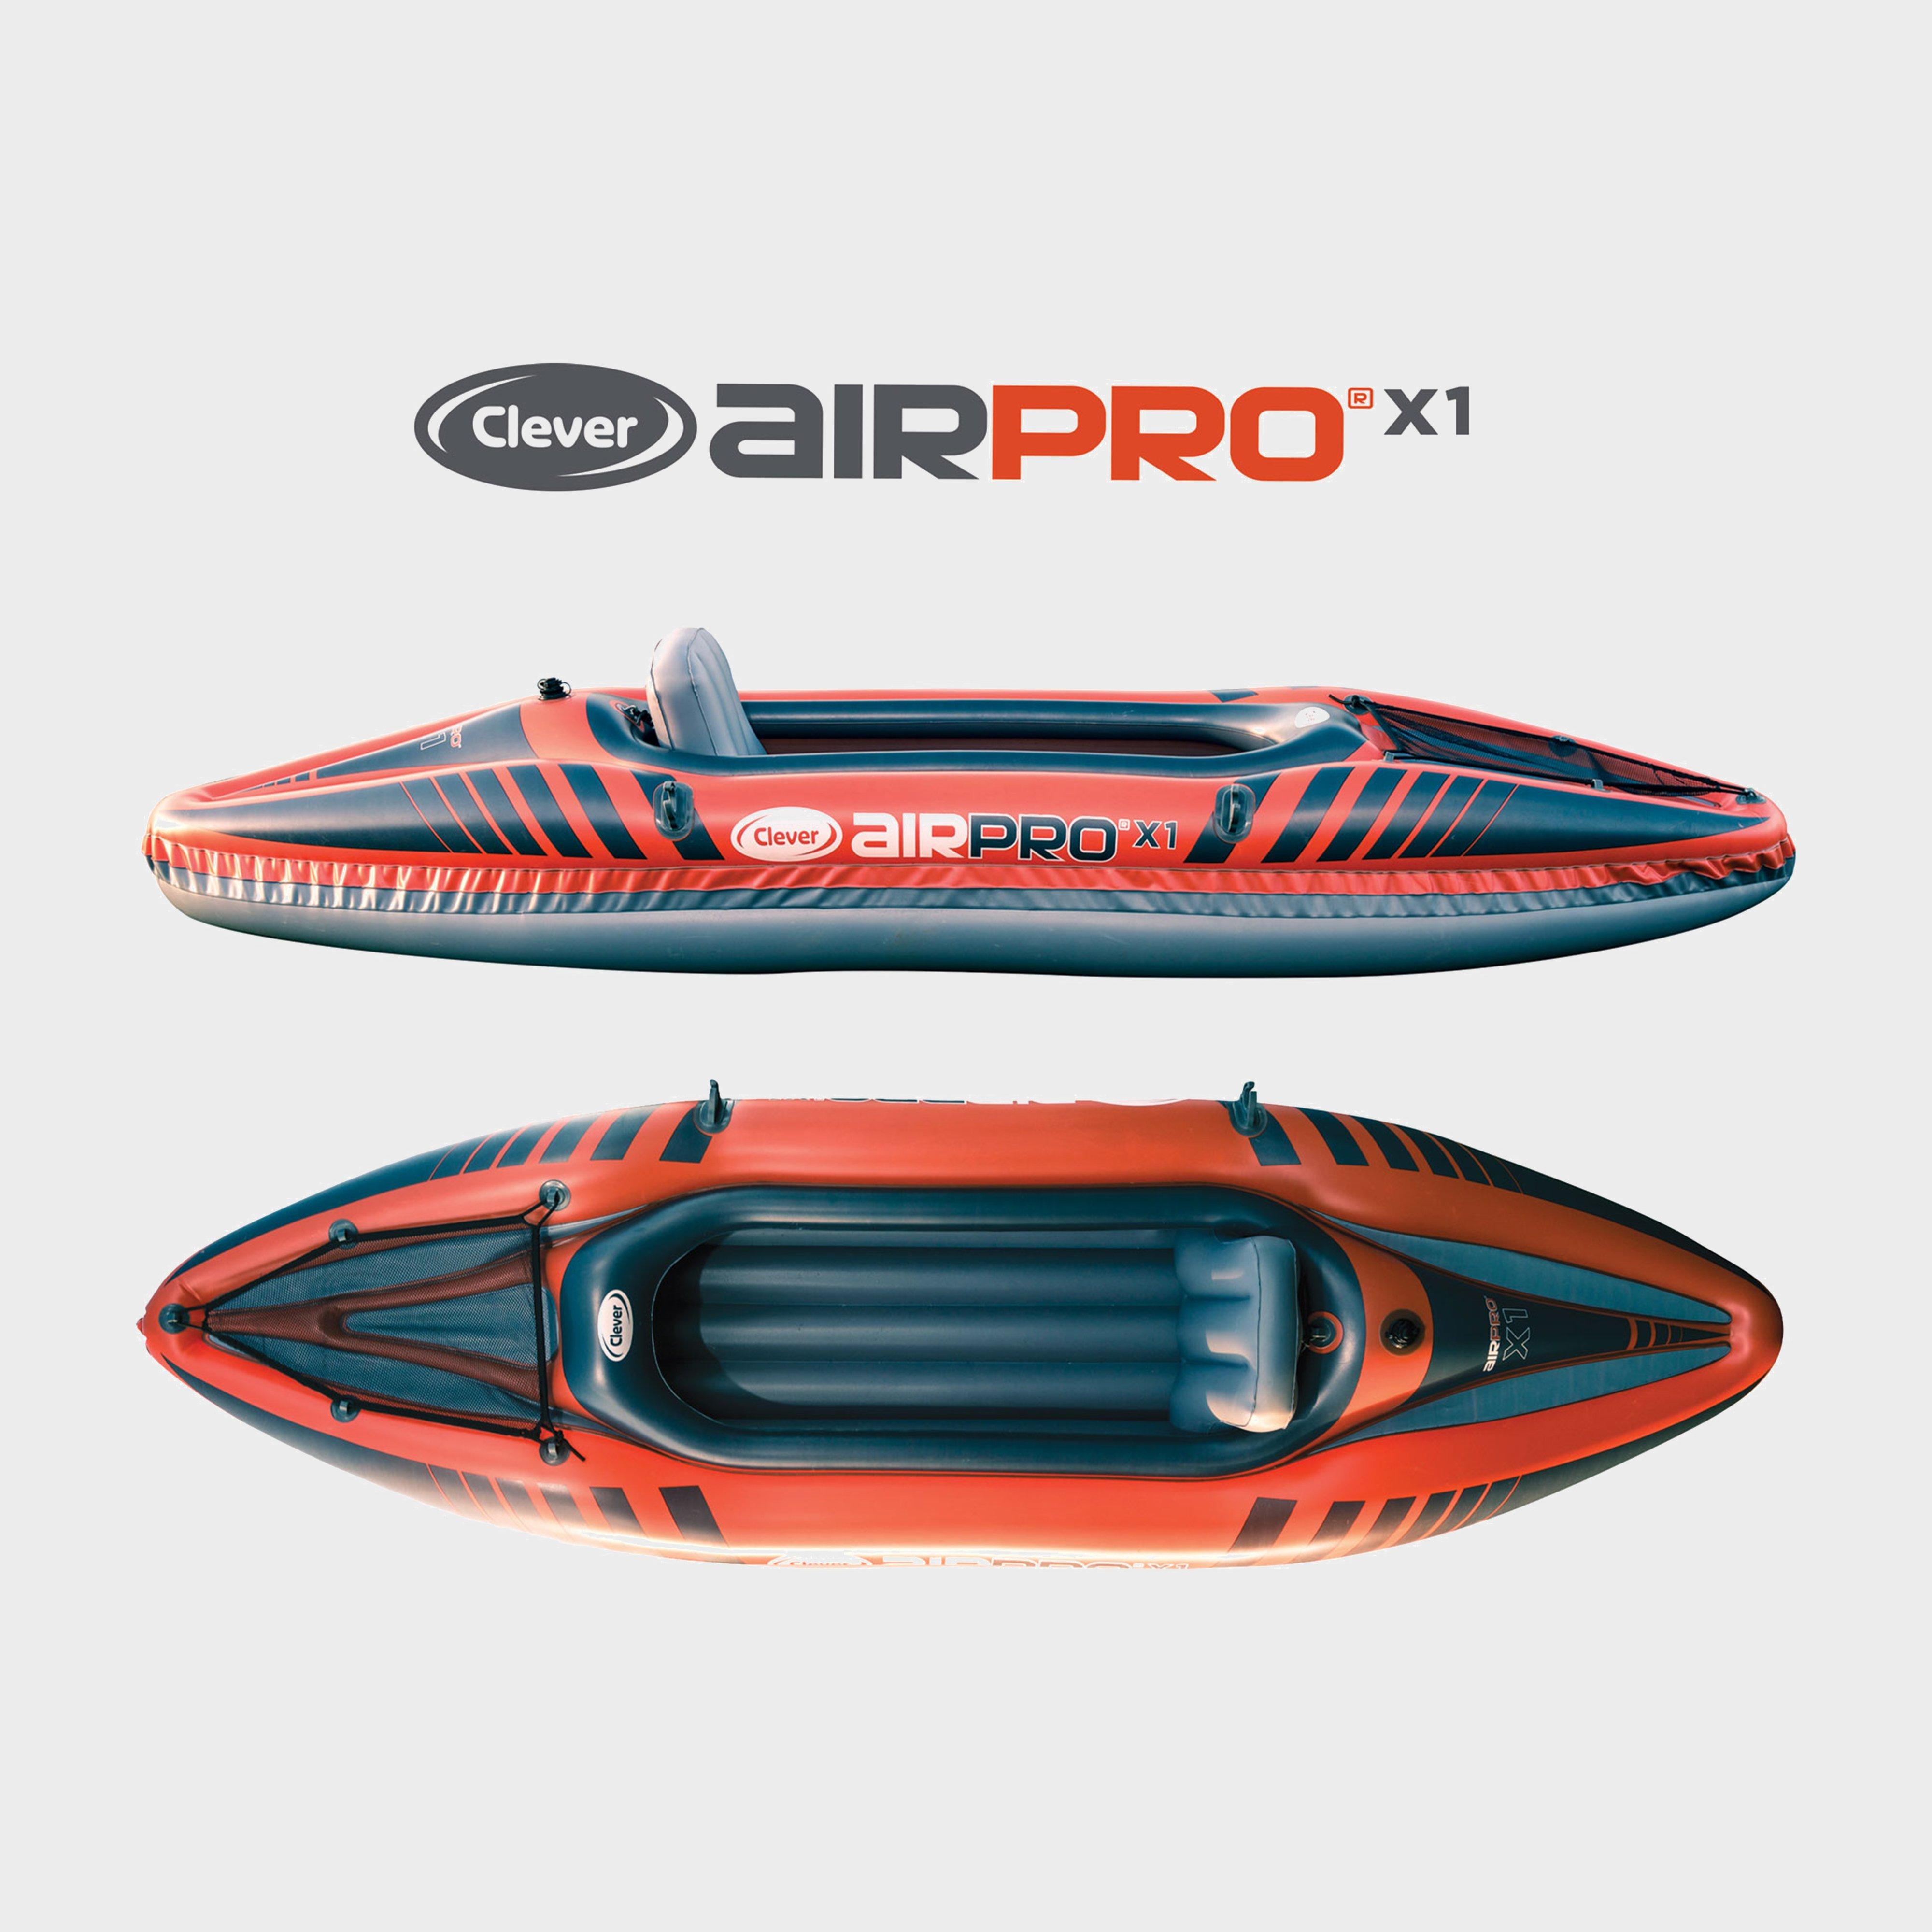 Clever AIRPRO x2-2 Person Inflatable Kayak